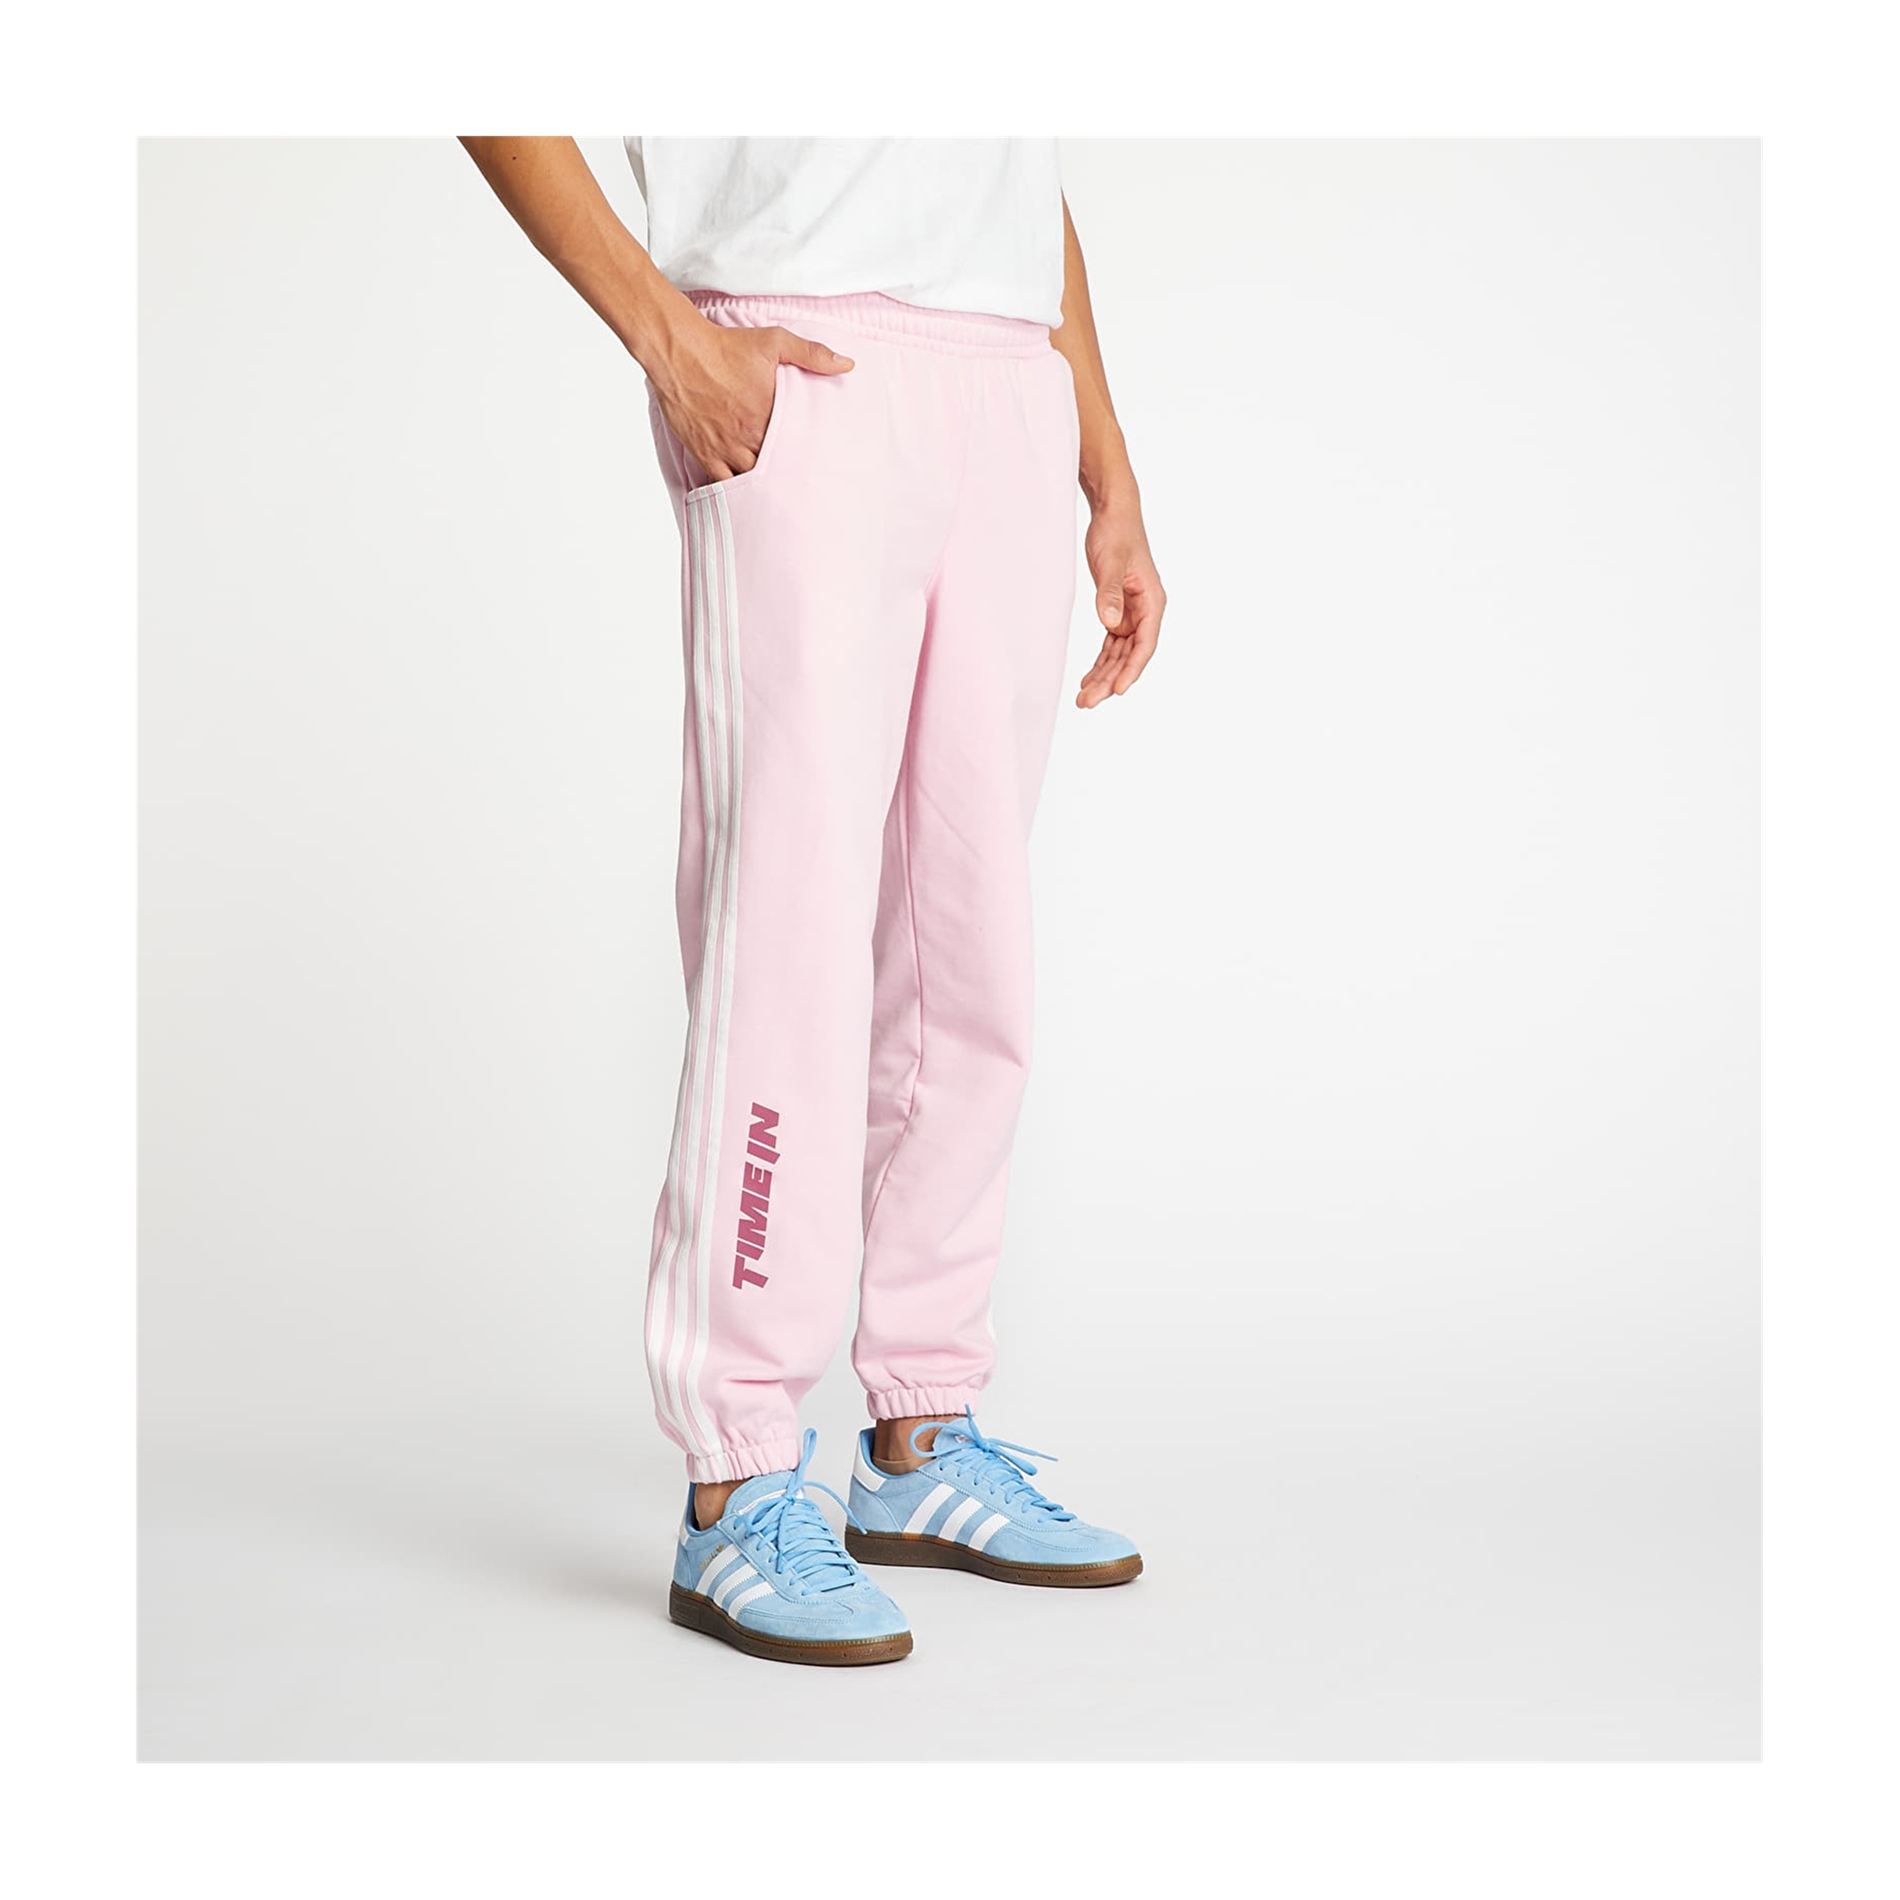 Adidas Mens Time In Athletic Jogger Pants